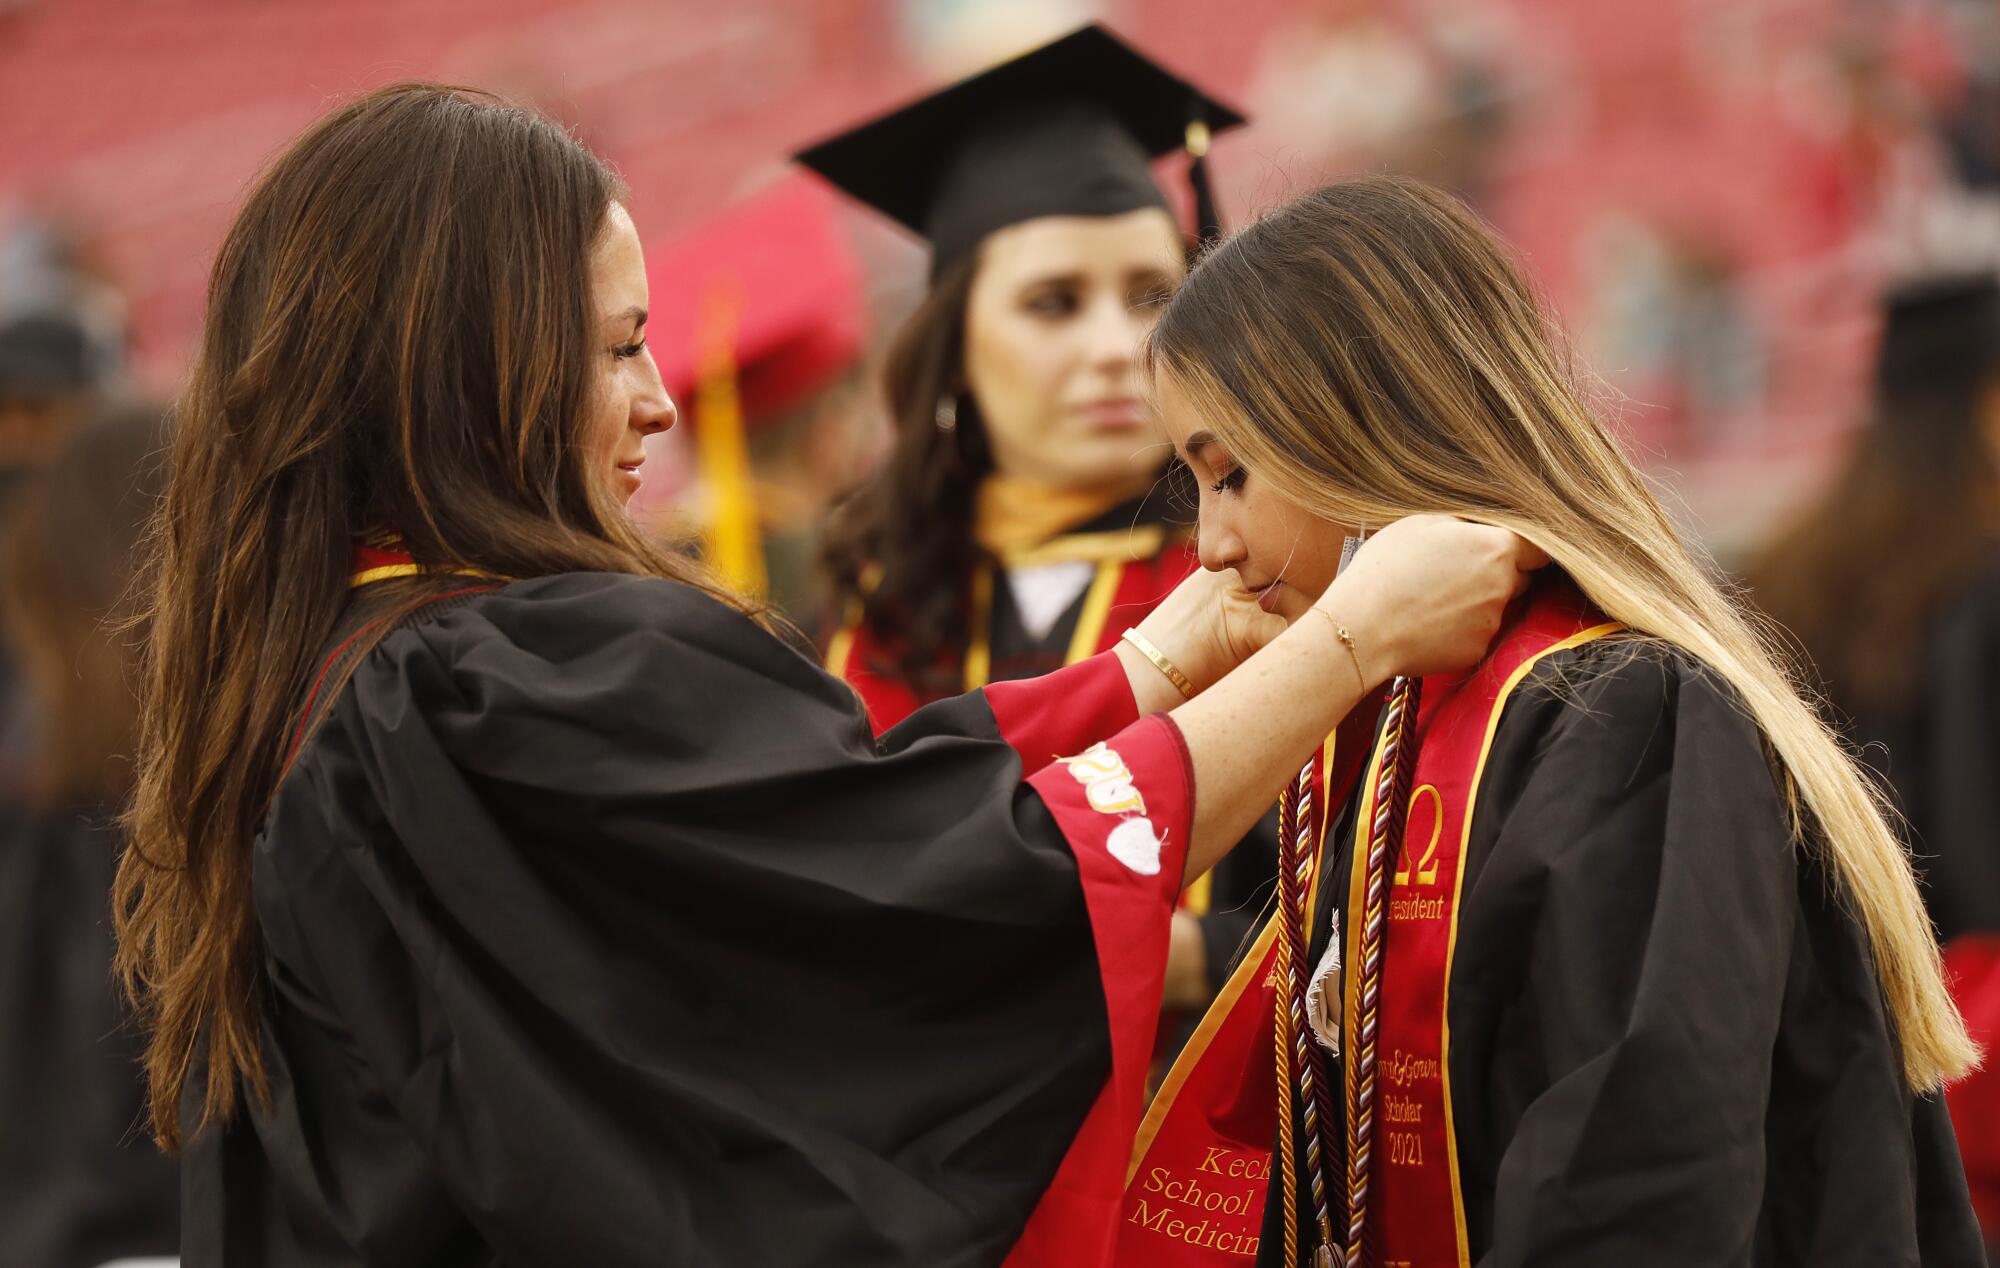 A woman adjusts the red sash around the neck of a fellow graduate